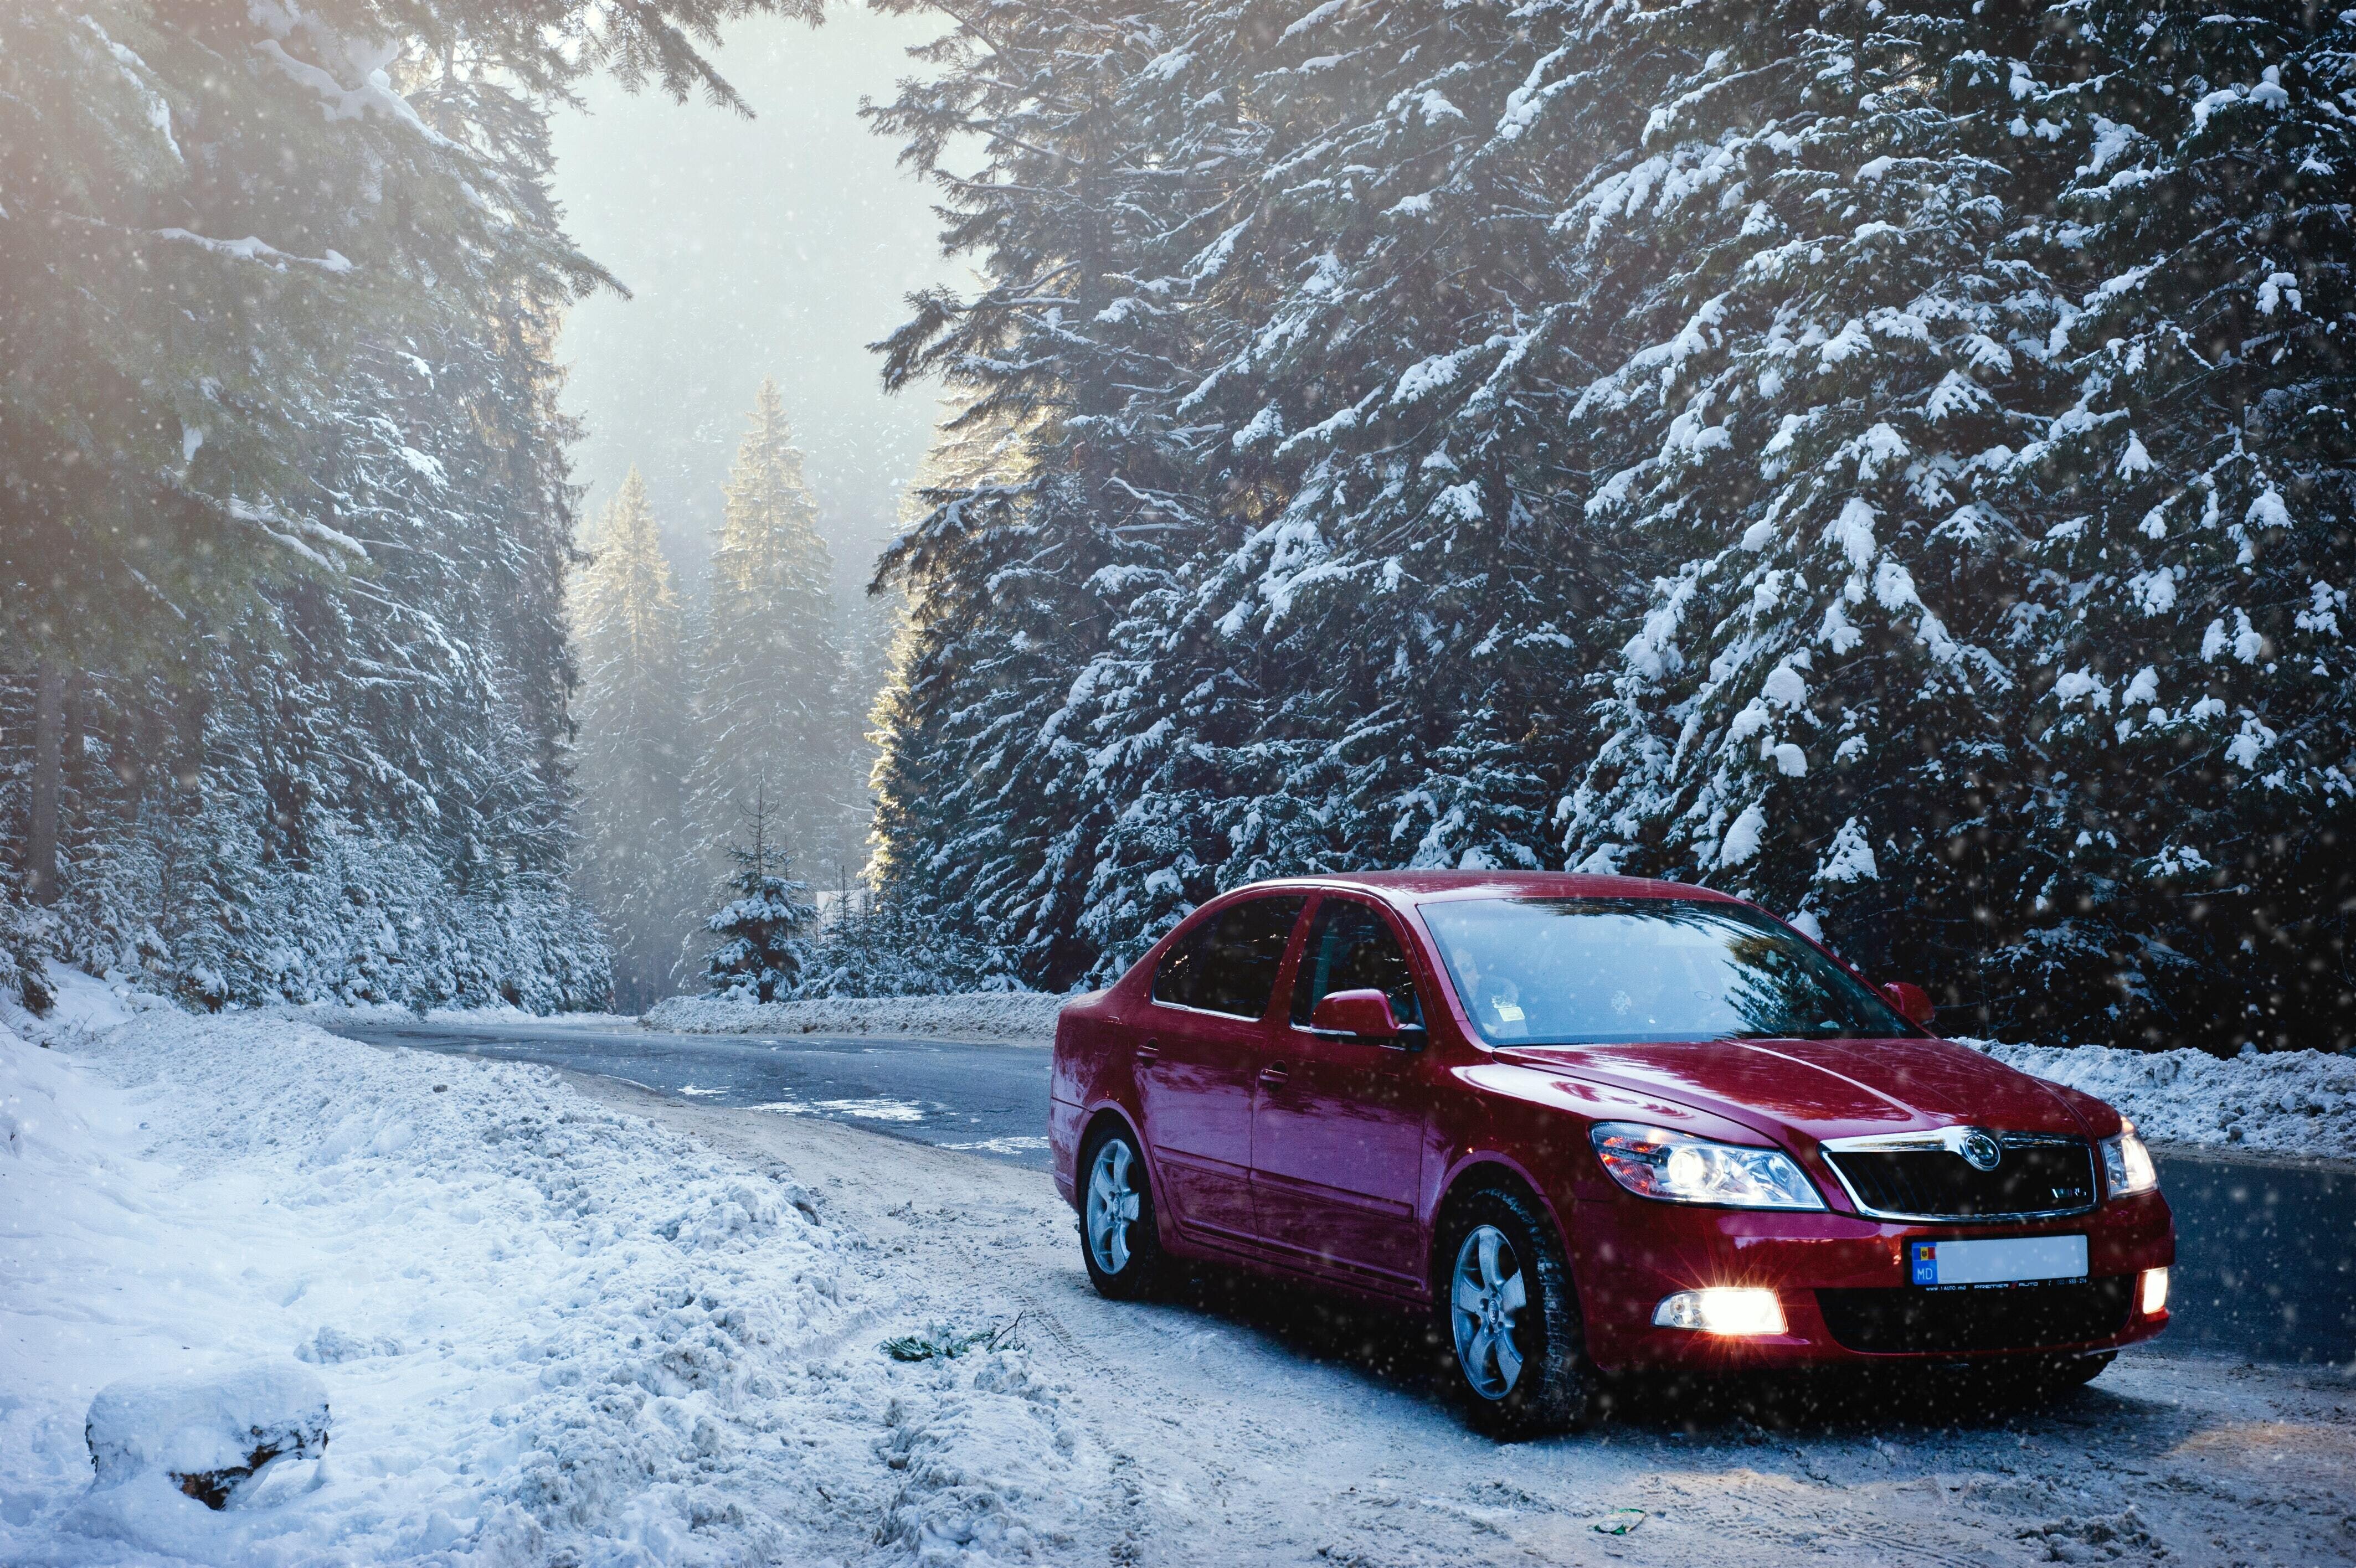 Vermont Winter Driving Tips To Keep You & Your Passengers Safe On Vermont Roads